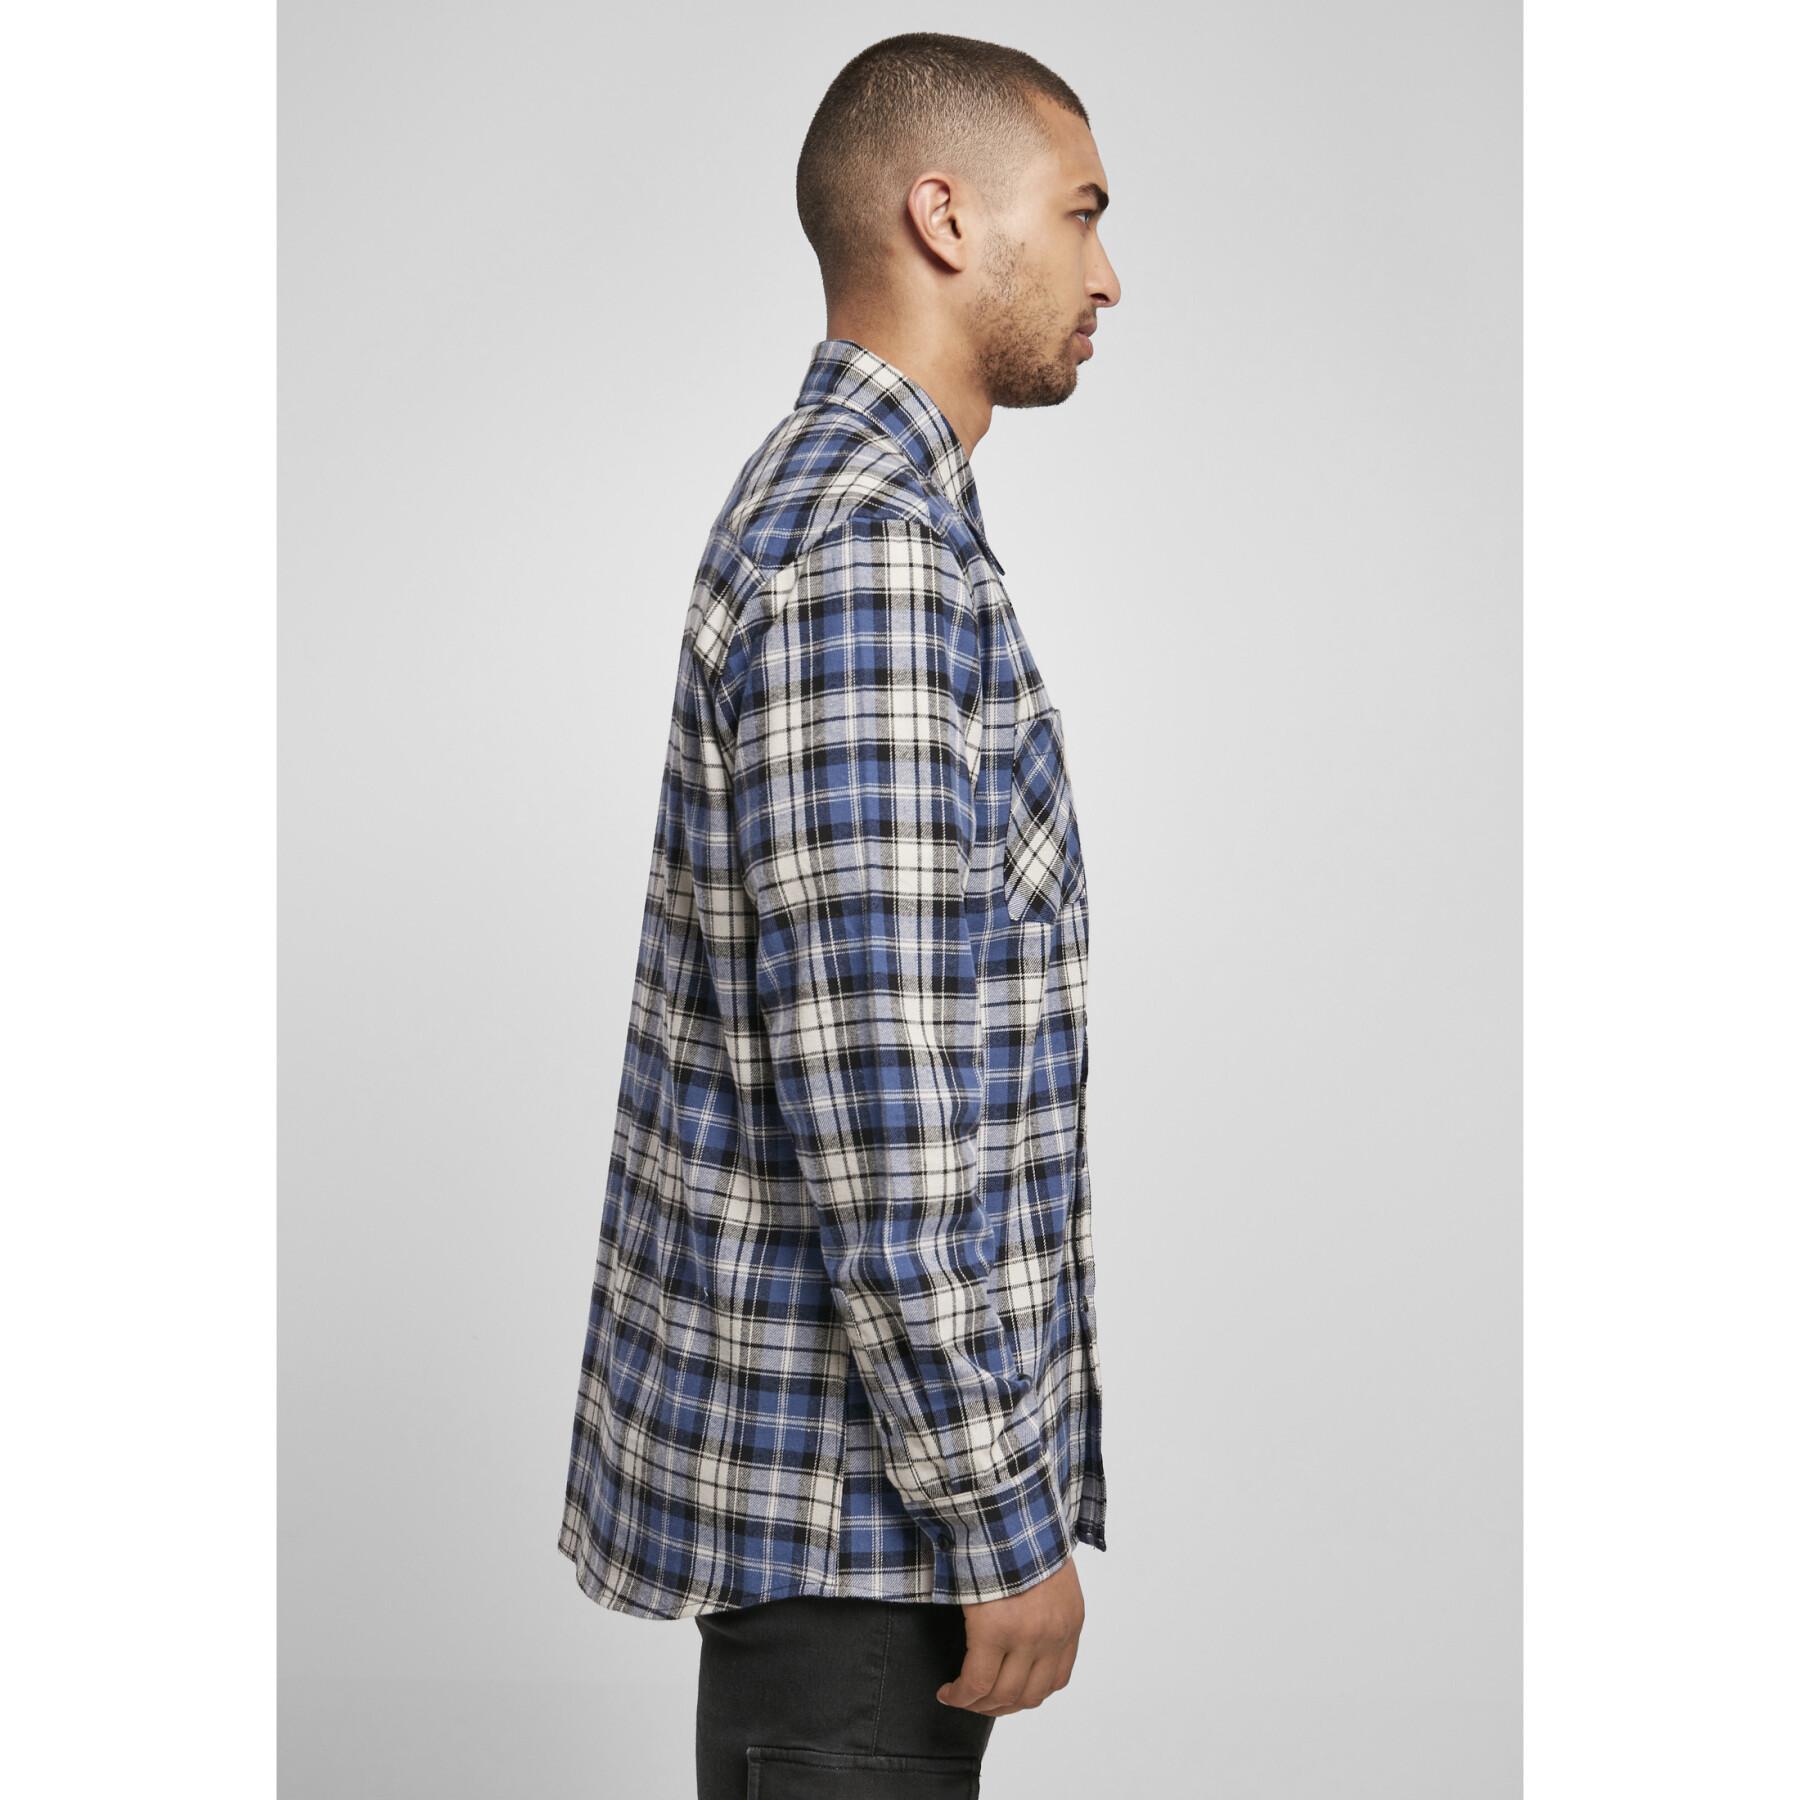 Chemise Urban Classics checked roots